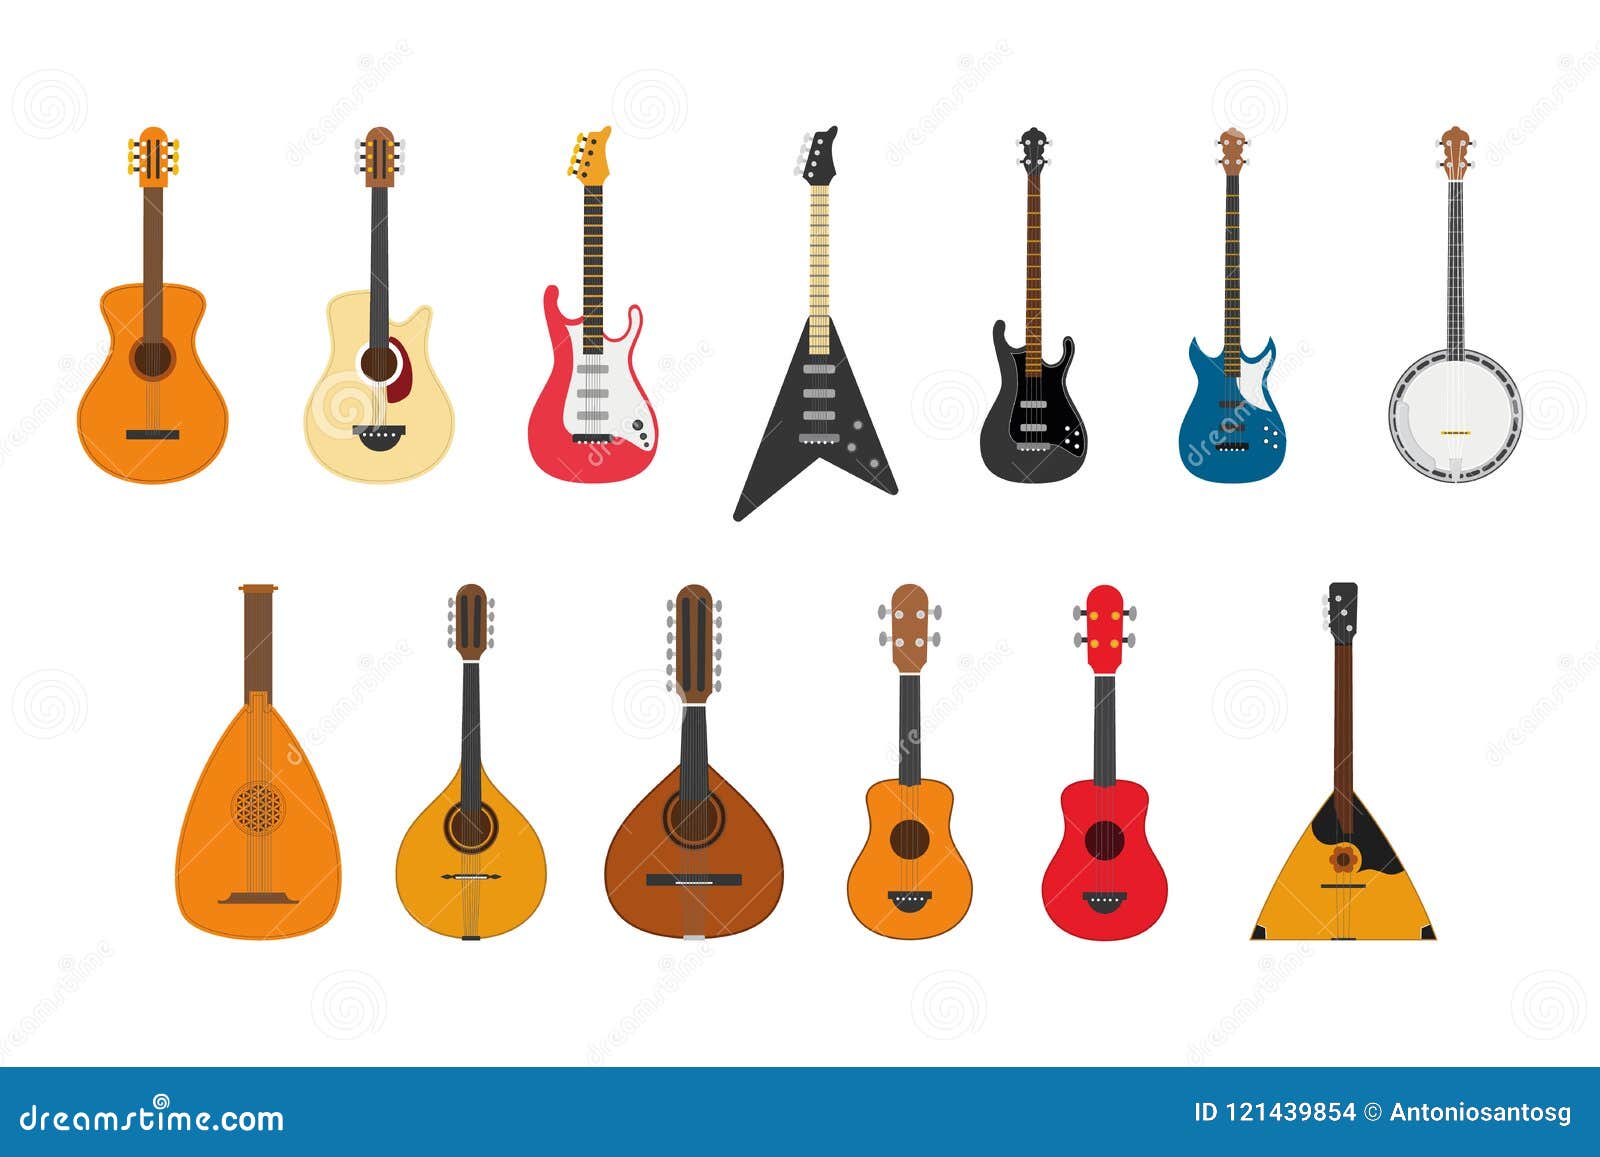 Set Of String Instruments Playing By Plucking The Strings Stock Vector Illustration Of Cartoon Equipment 121439854 Banjo a stringed instrument in the guitar family with a long neck, five strings and a round body like a tambourine with an open back. https www dreamstime com set string instruments playing plucking strings vector illustration image121439854